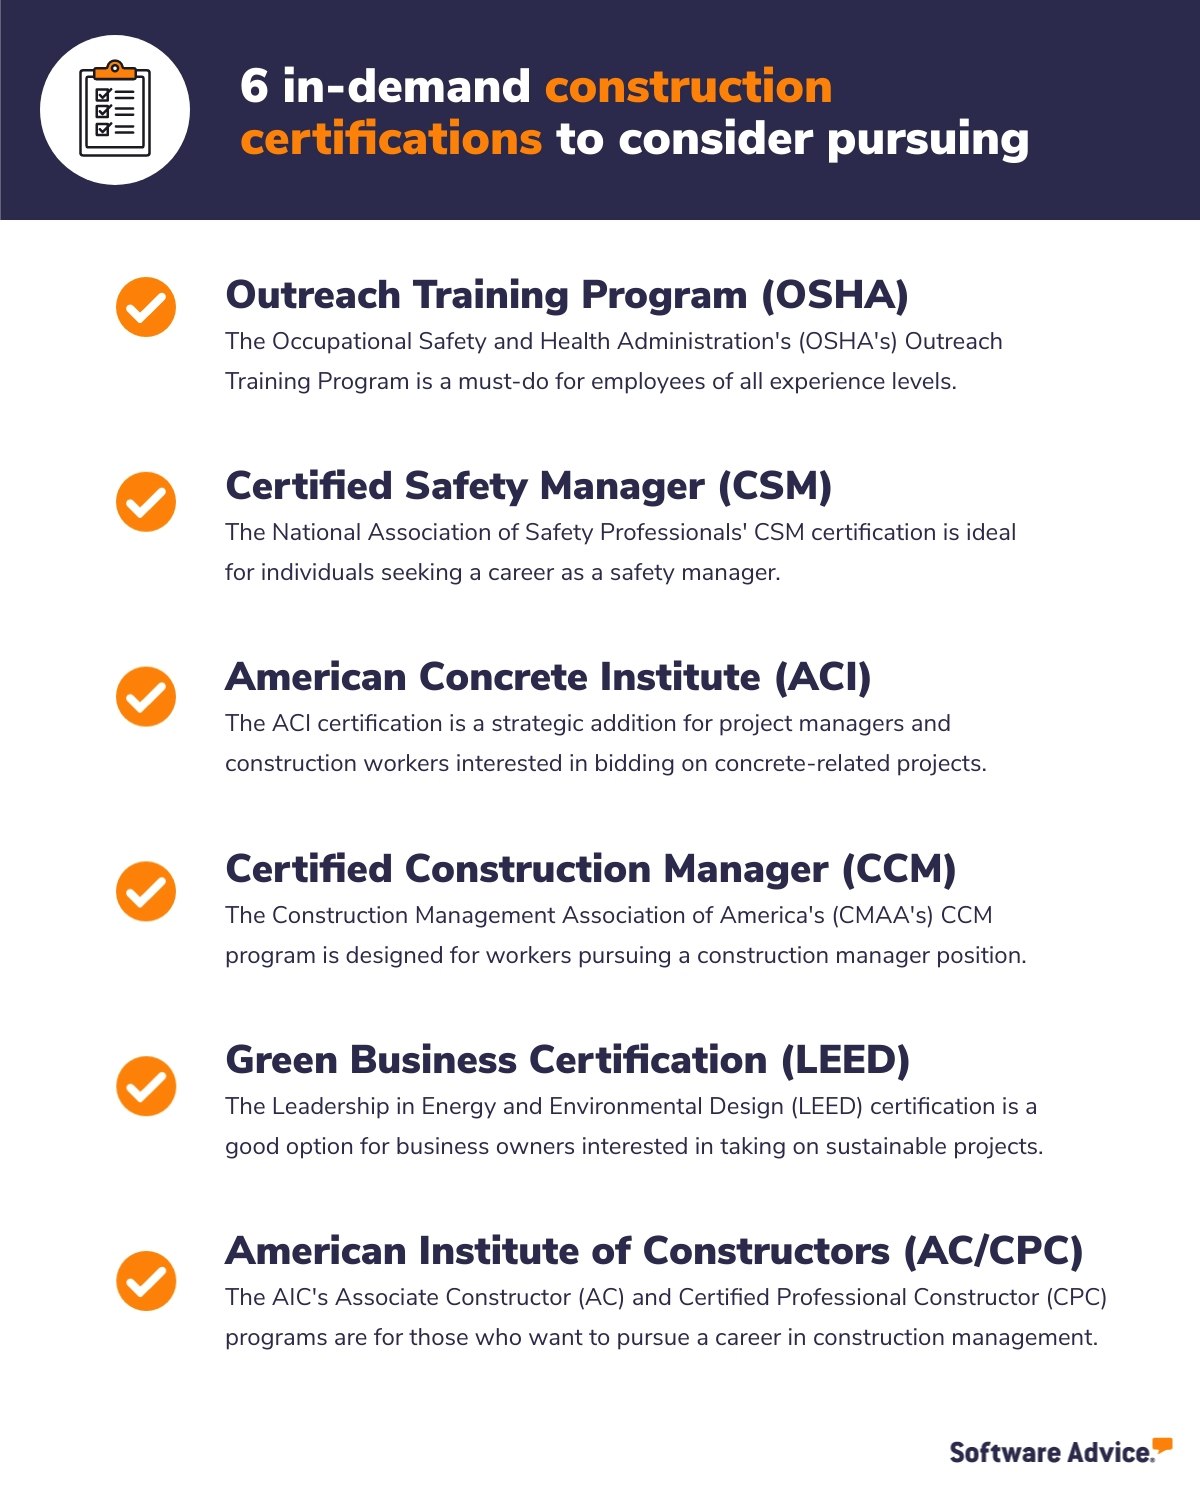 6-in-demand-construction-certifications-to-consider-pursuing